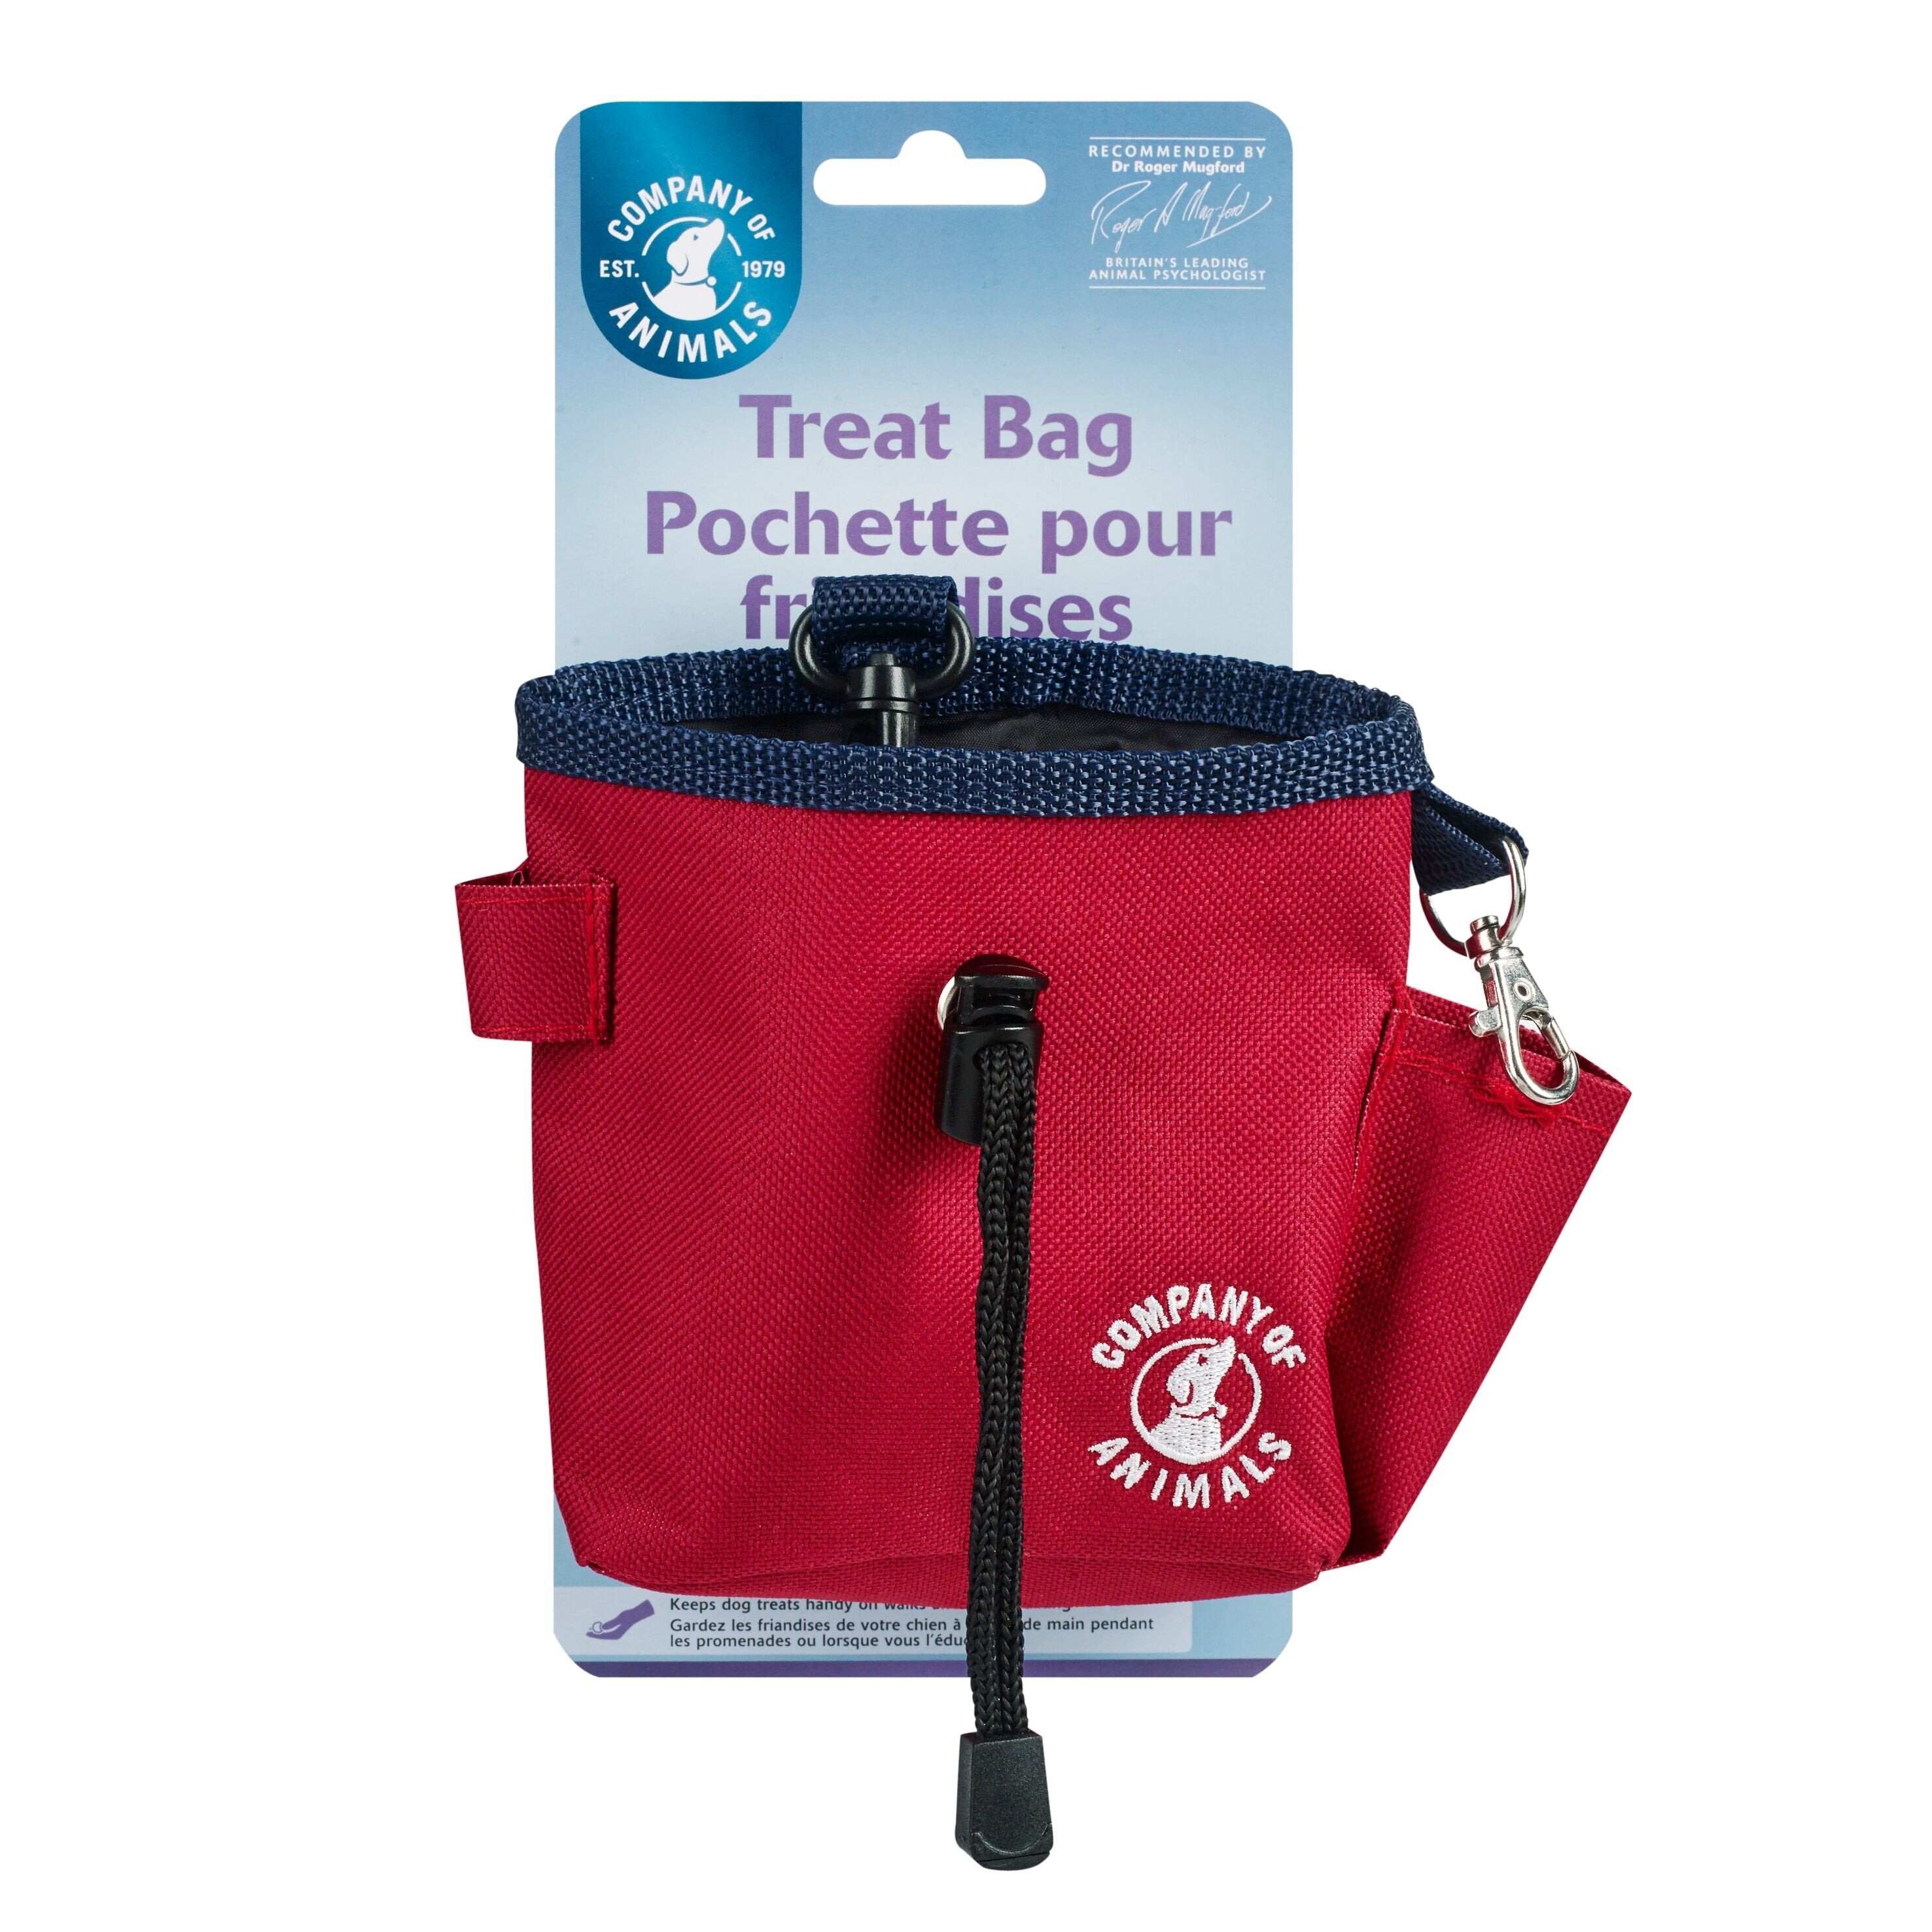 A red treat bag with a black clip and a black draw string. The Company of Animals logo is in white on the bottom right of the treat bag. The treat bag is attached to its cardboard packaging.